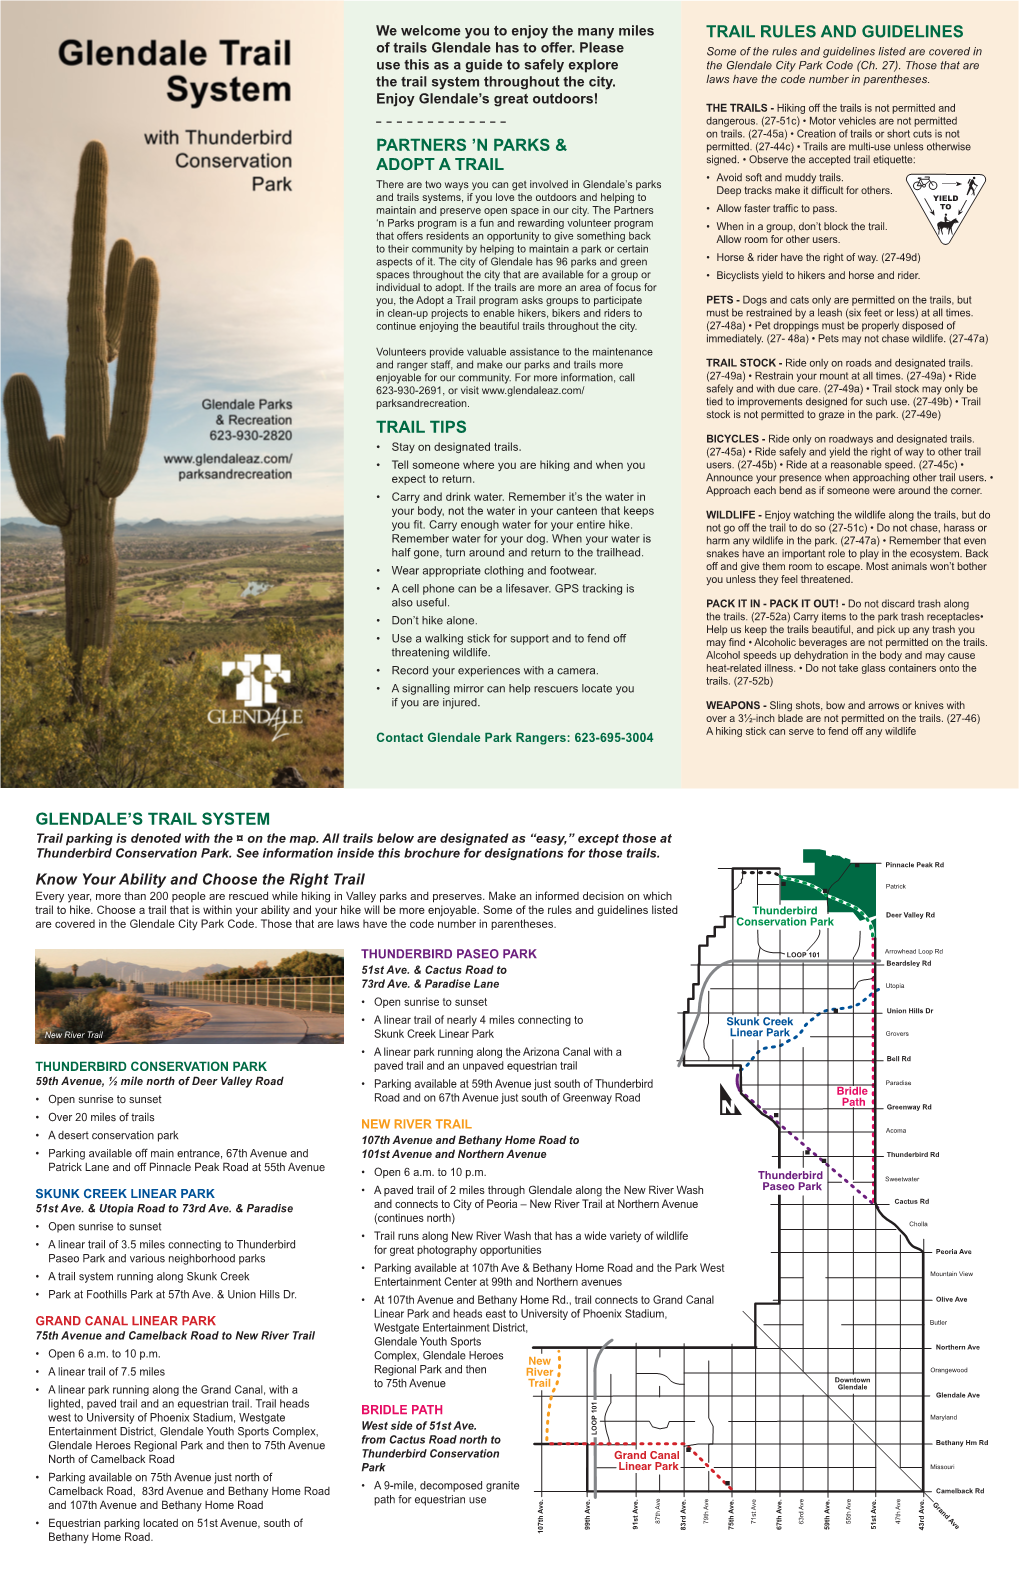 Glendale's Trail System Partners